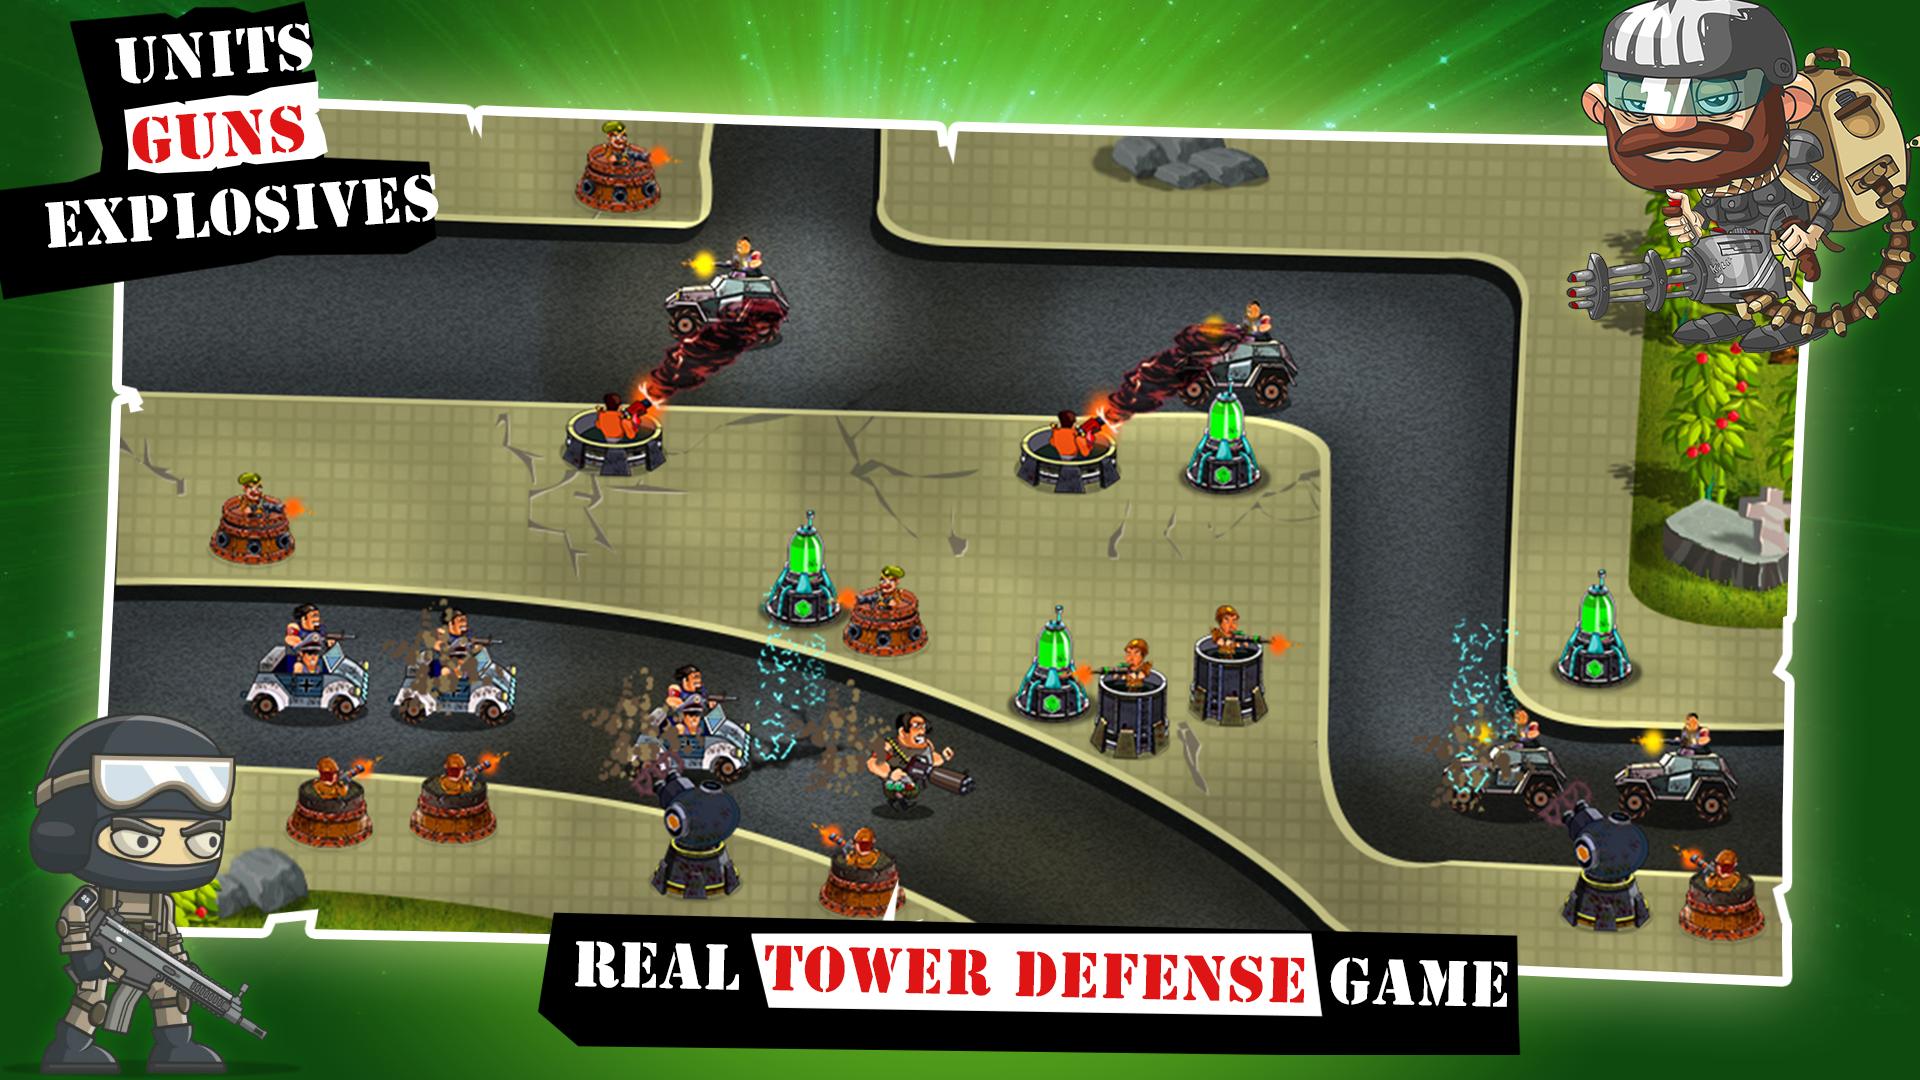 Furry tower defense. Tower Defense Android. Юниты ТОВЕР дефенс. ТОВЕР дефенс Юнит командо. Allies vs Axis game.